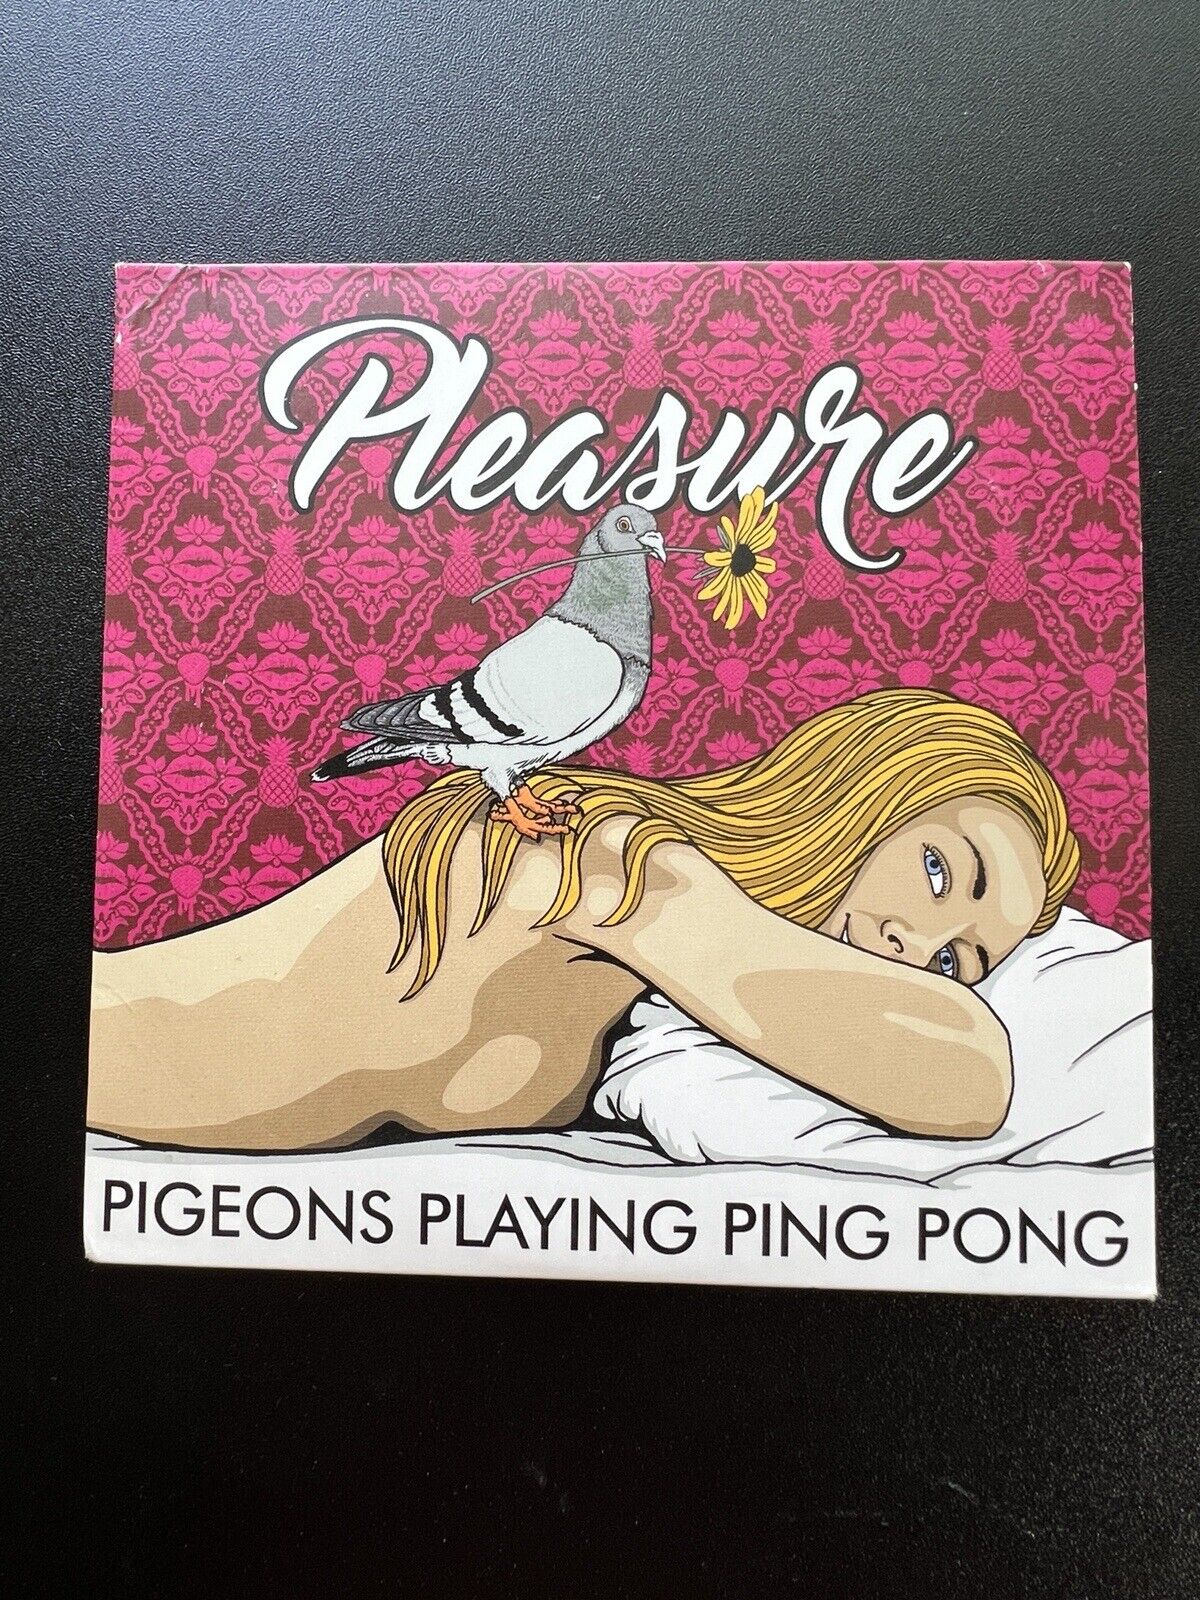 Ultra Rare Pigeons Playing Ping Pong - Pleasure 2016 Self Released CD 